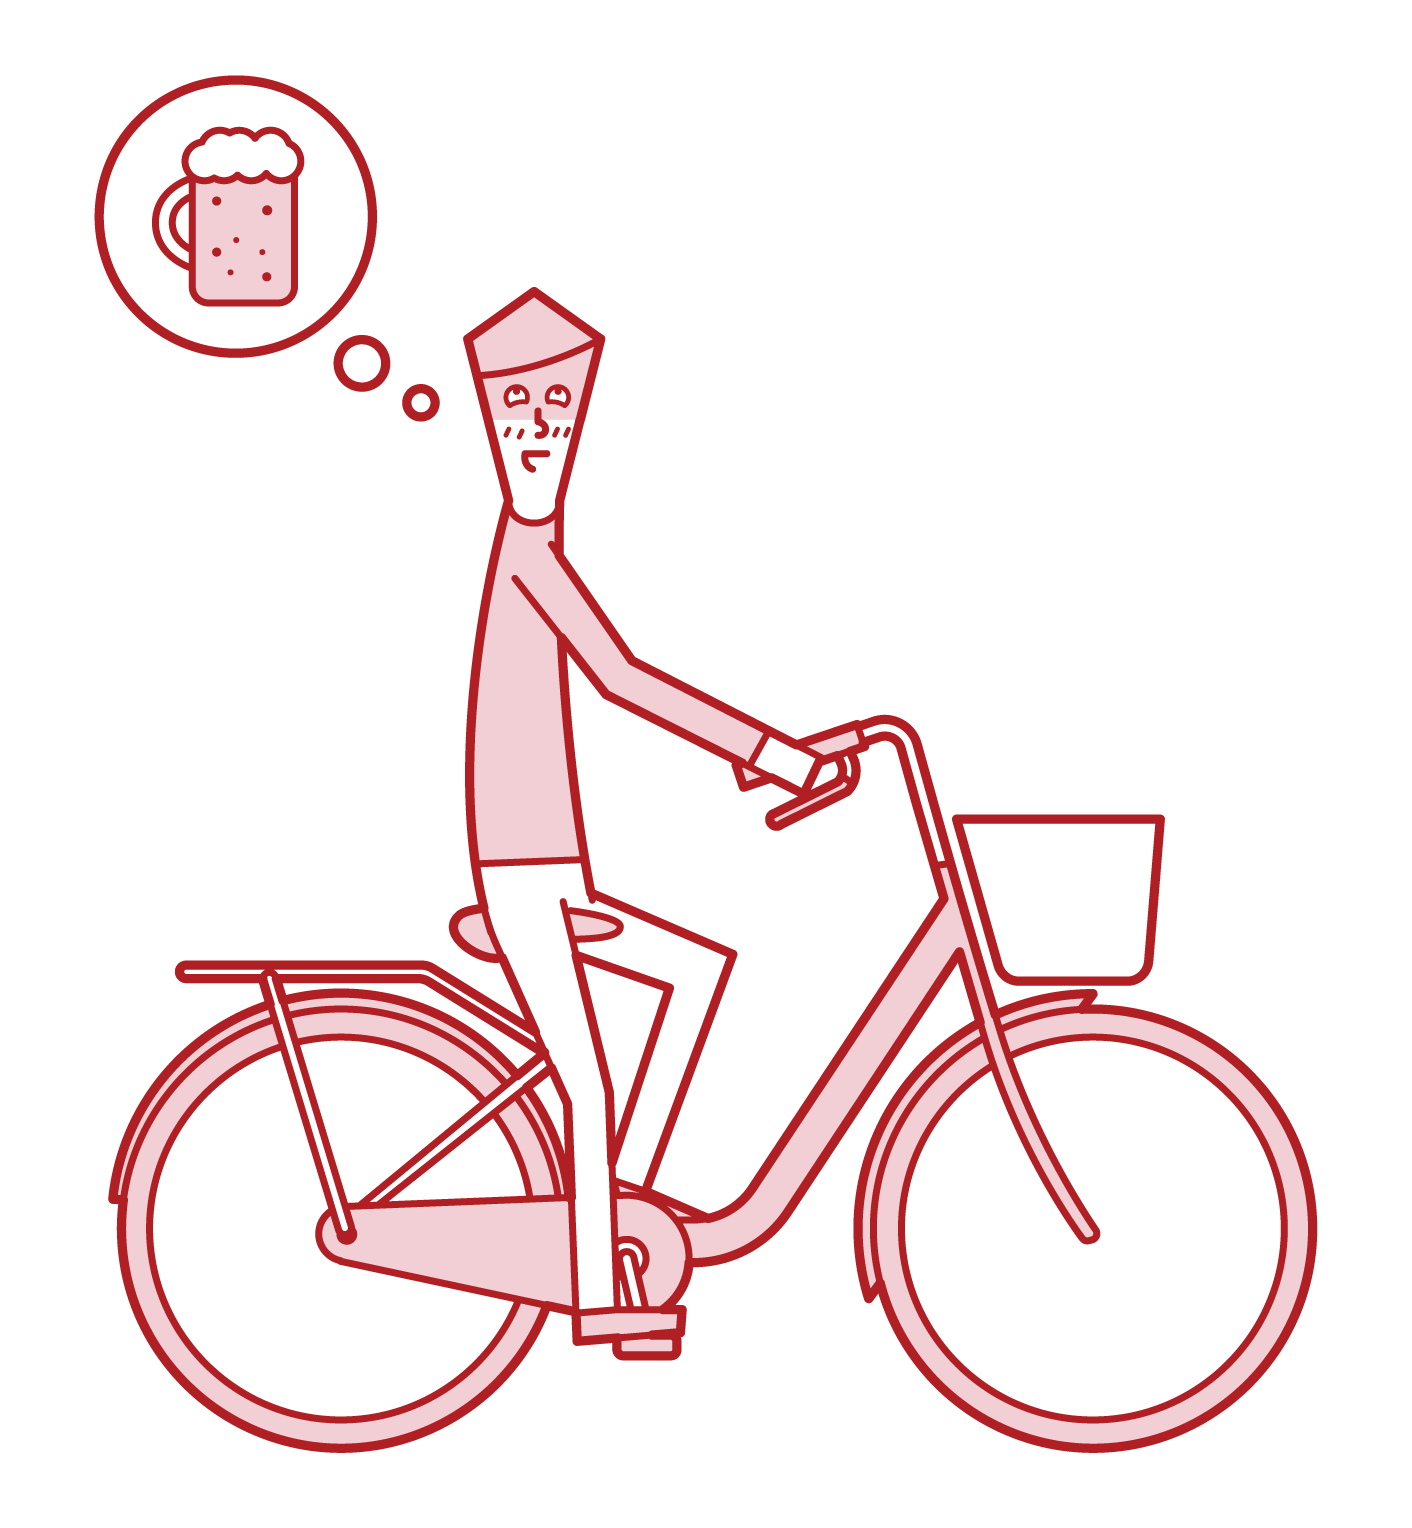 Illustration of a man driving drunk on a bicycle